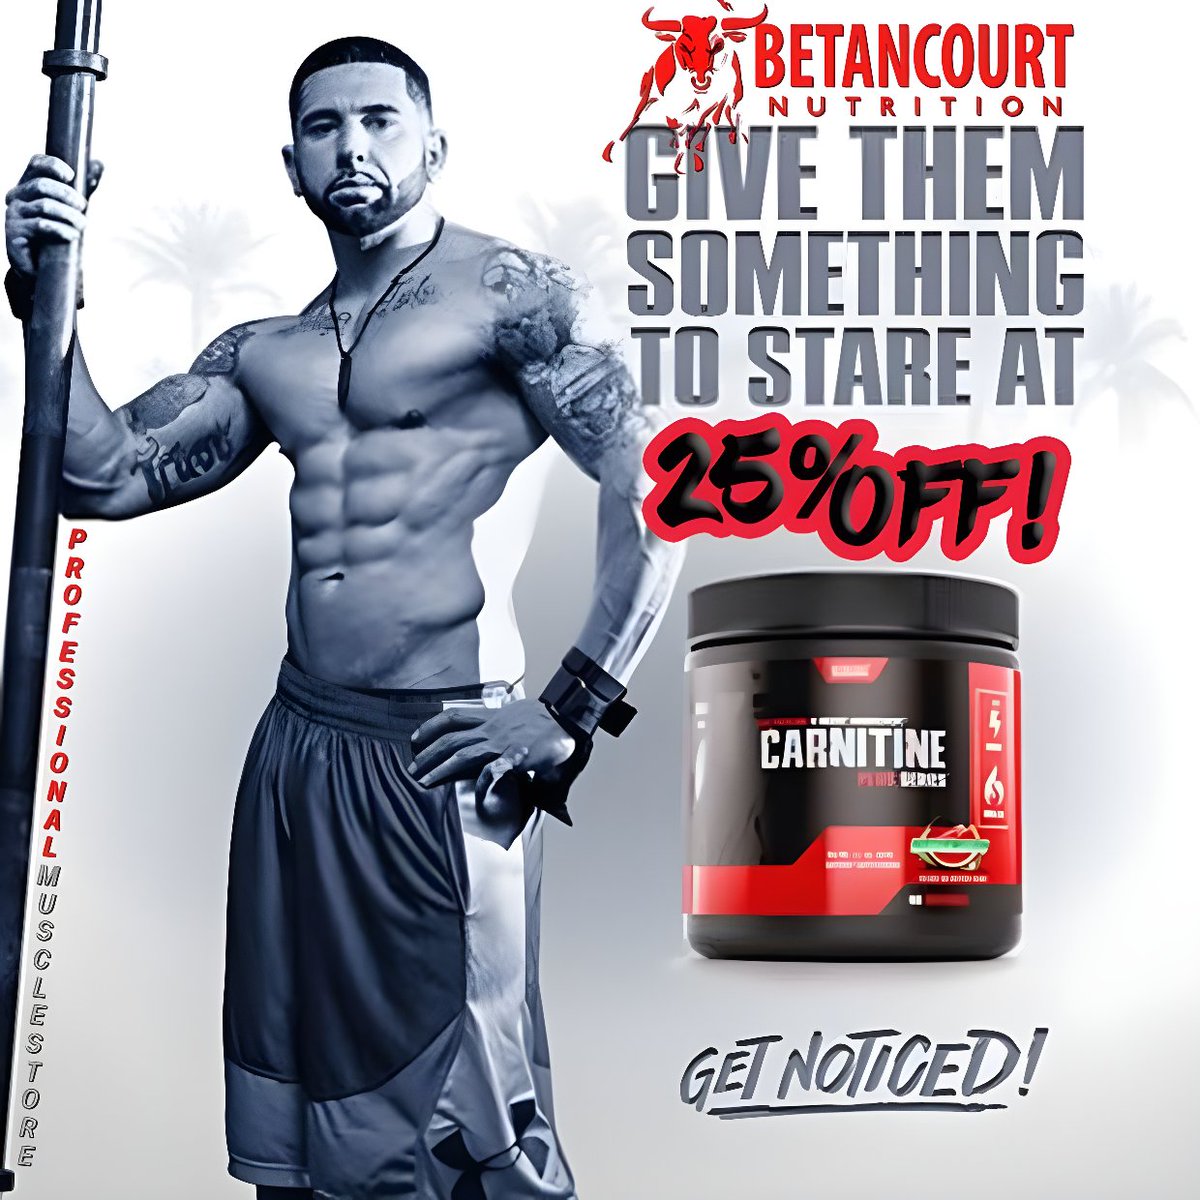 25% OFF Betancourt Carnitine + Series! Use code BETA at checkout!
professionalmusclestore.com/.../betancourt...
#supplements #ripped #muscle #bodybuilding #pump #training #strong #gymlife #gym #workout #fitness #squat #gains #shredded #ifbb #instafit #sale
ProfessionalMuscleStore.com